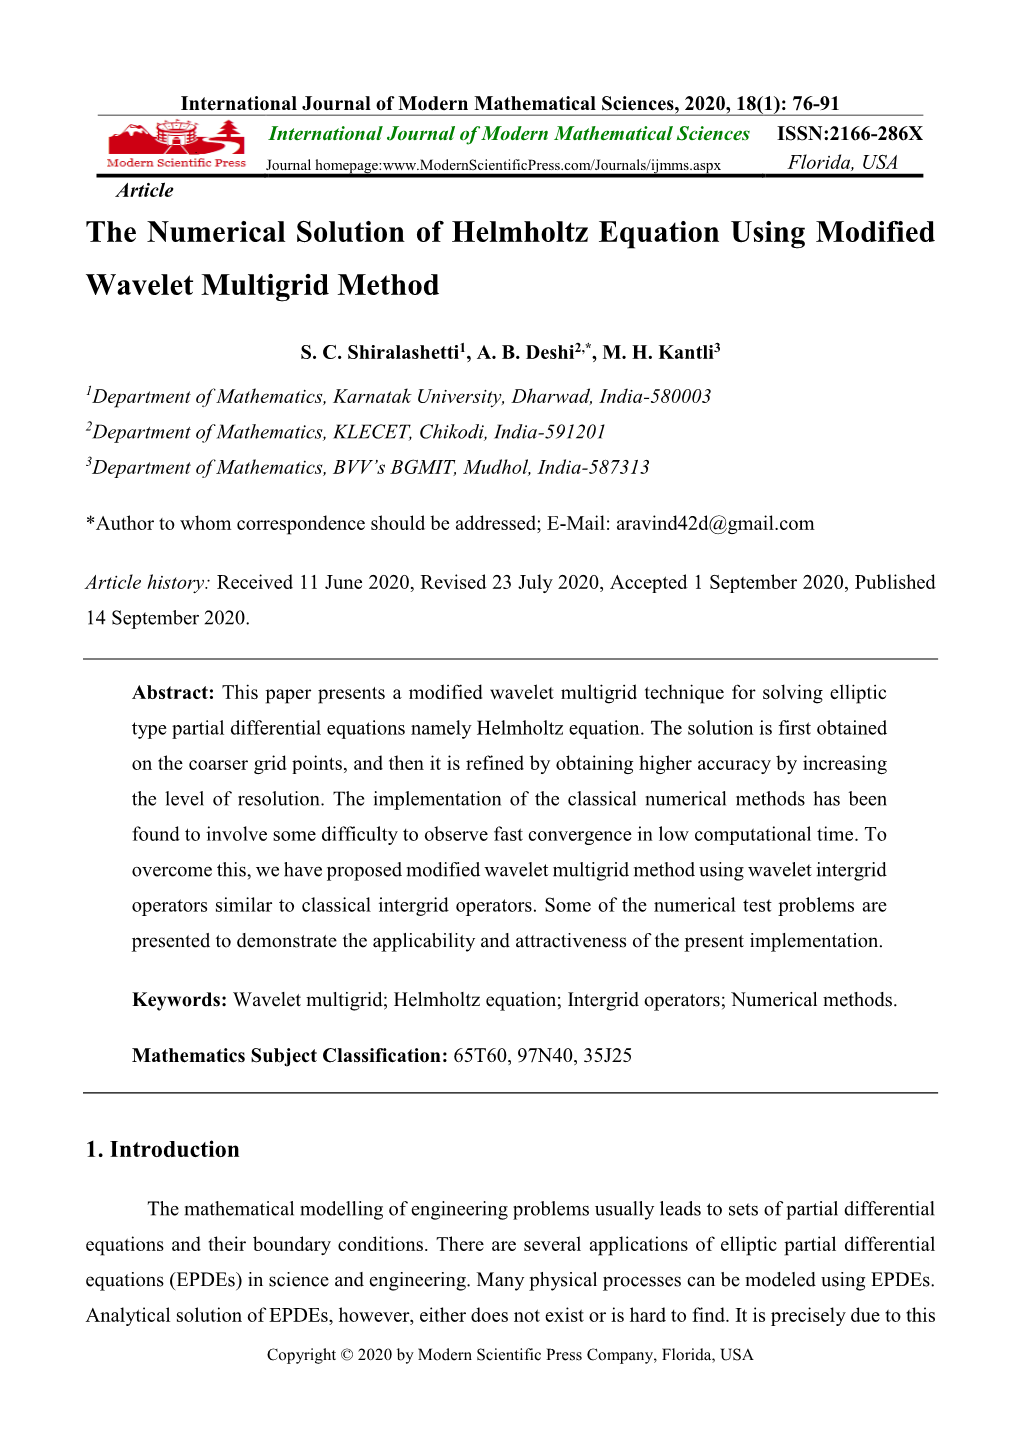 The Numerical Solution of Helmholtz Equation Using Modified Wavelet Multigrid Method